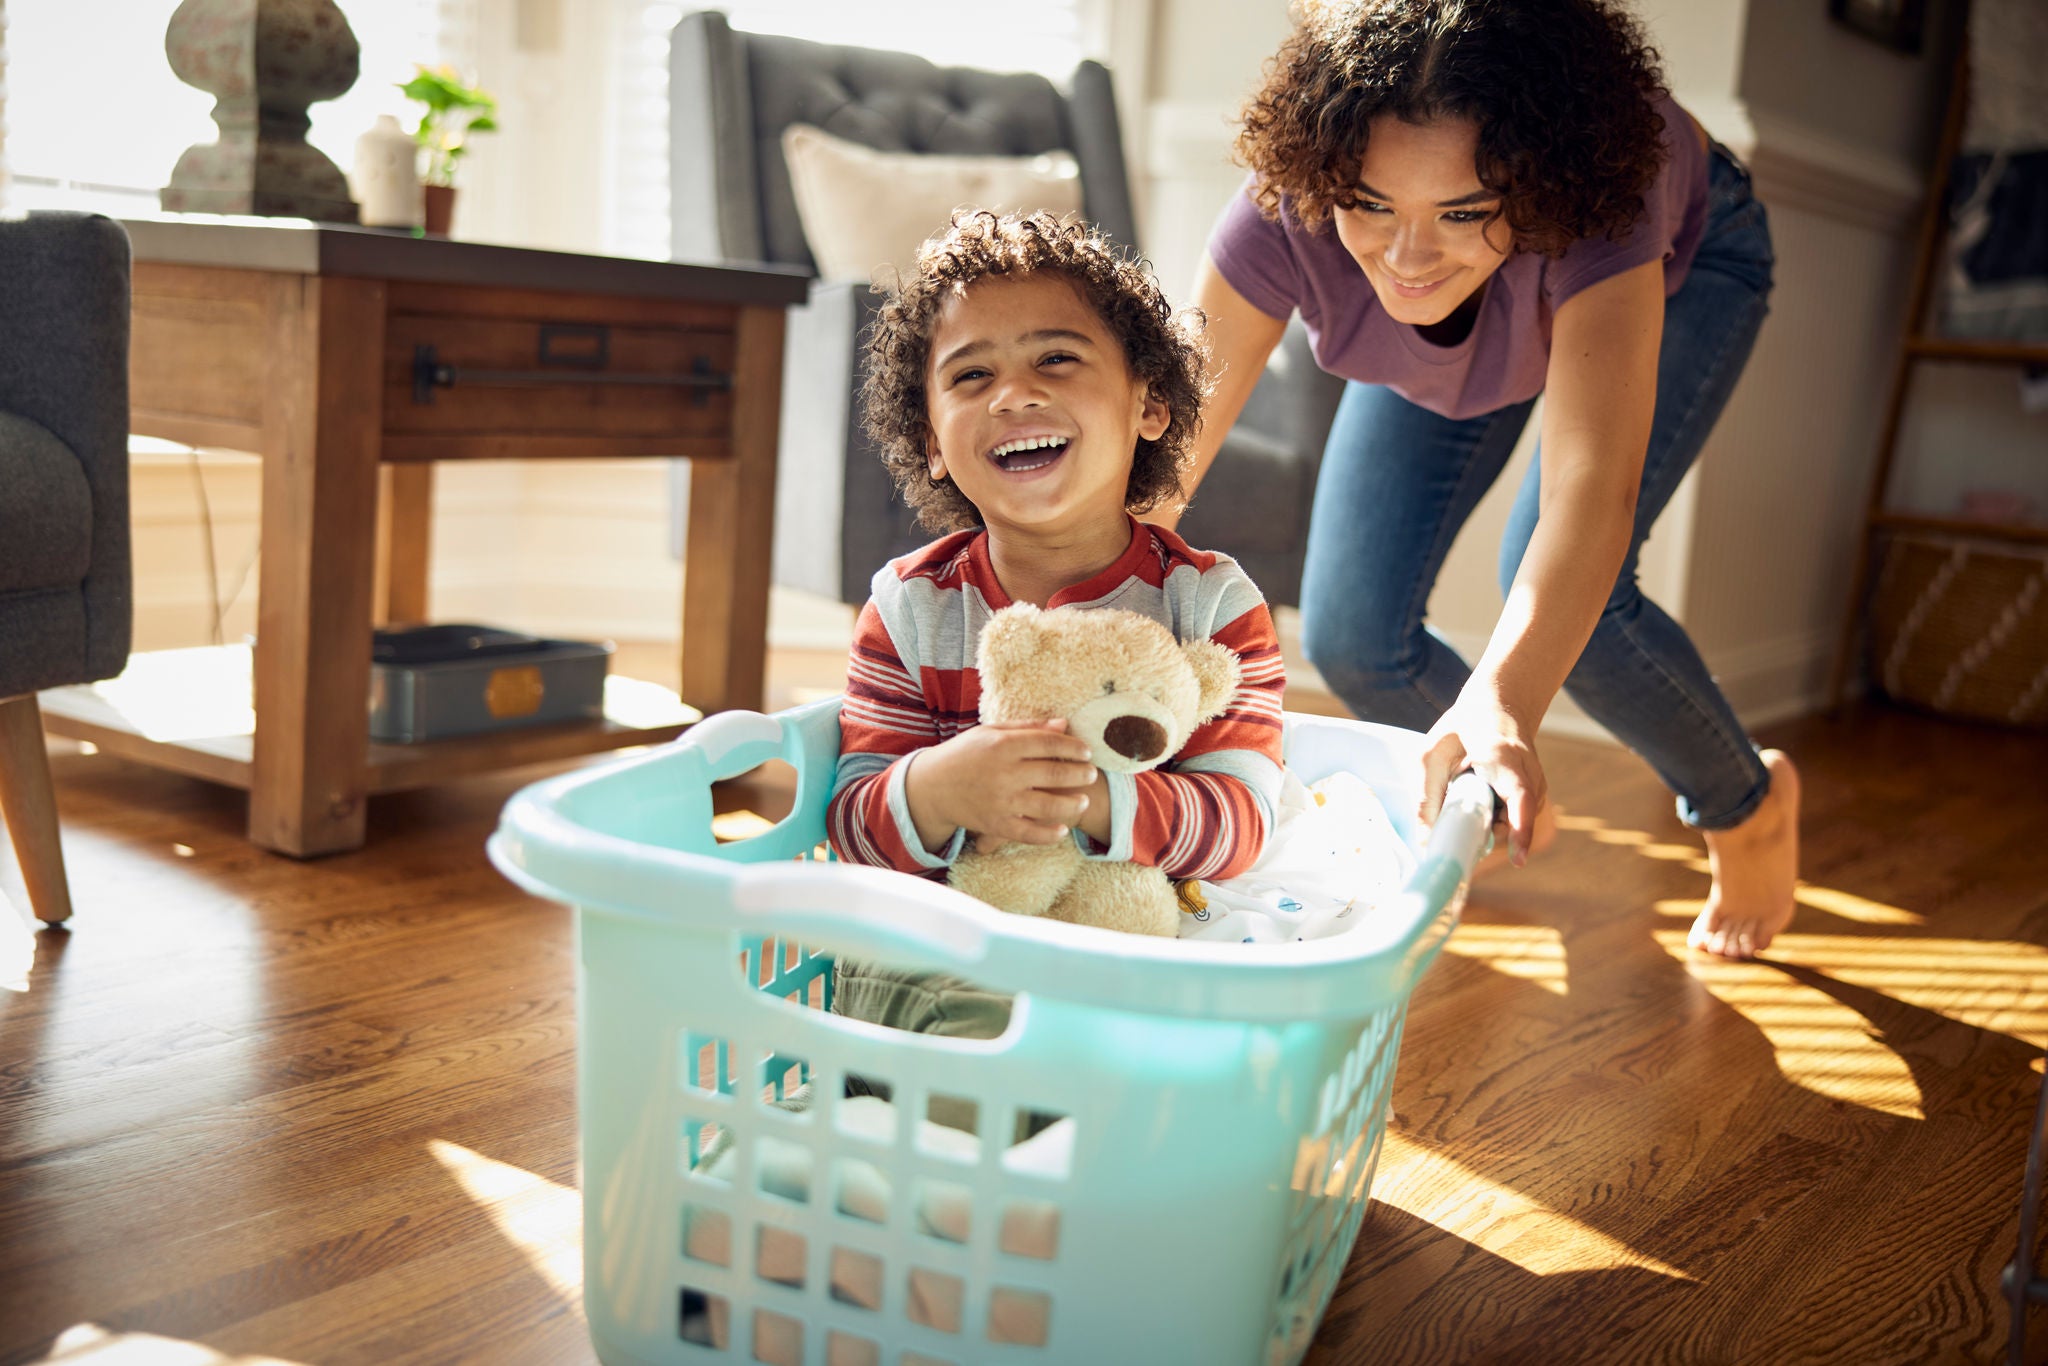 Older sister gives younger brother a ride in the laundry basket. African American teenage girl gives her younger brother a ride in a laundry basket. She pushes him around in a laundry basket with his stuffed bear on the hardwood floor of the home where they live.